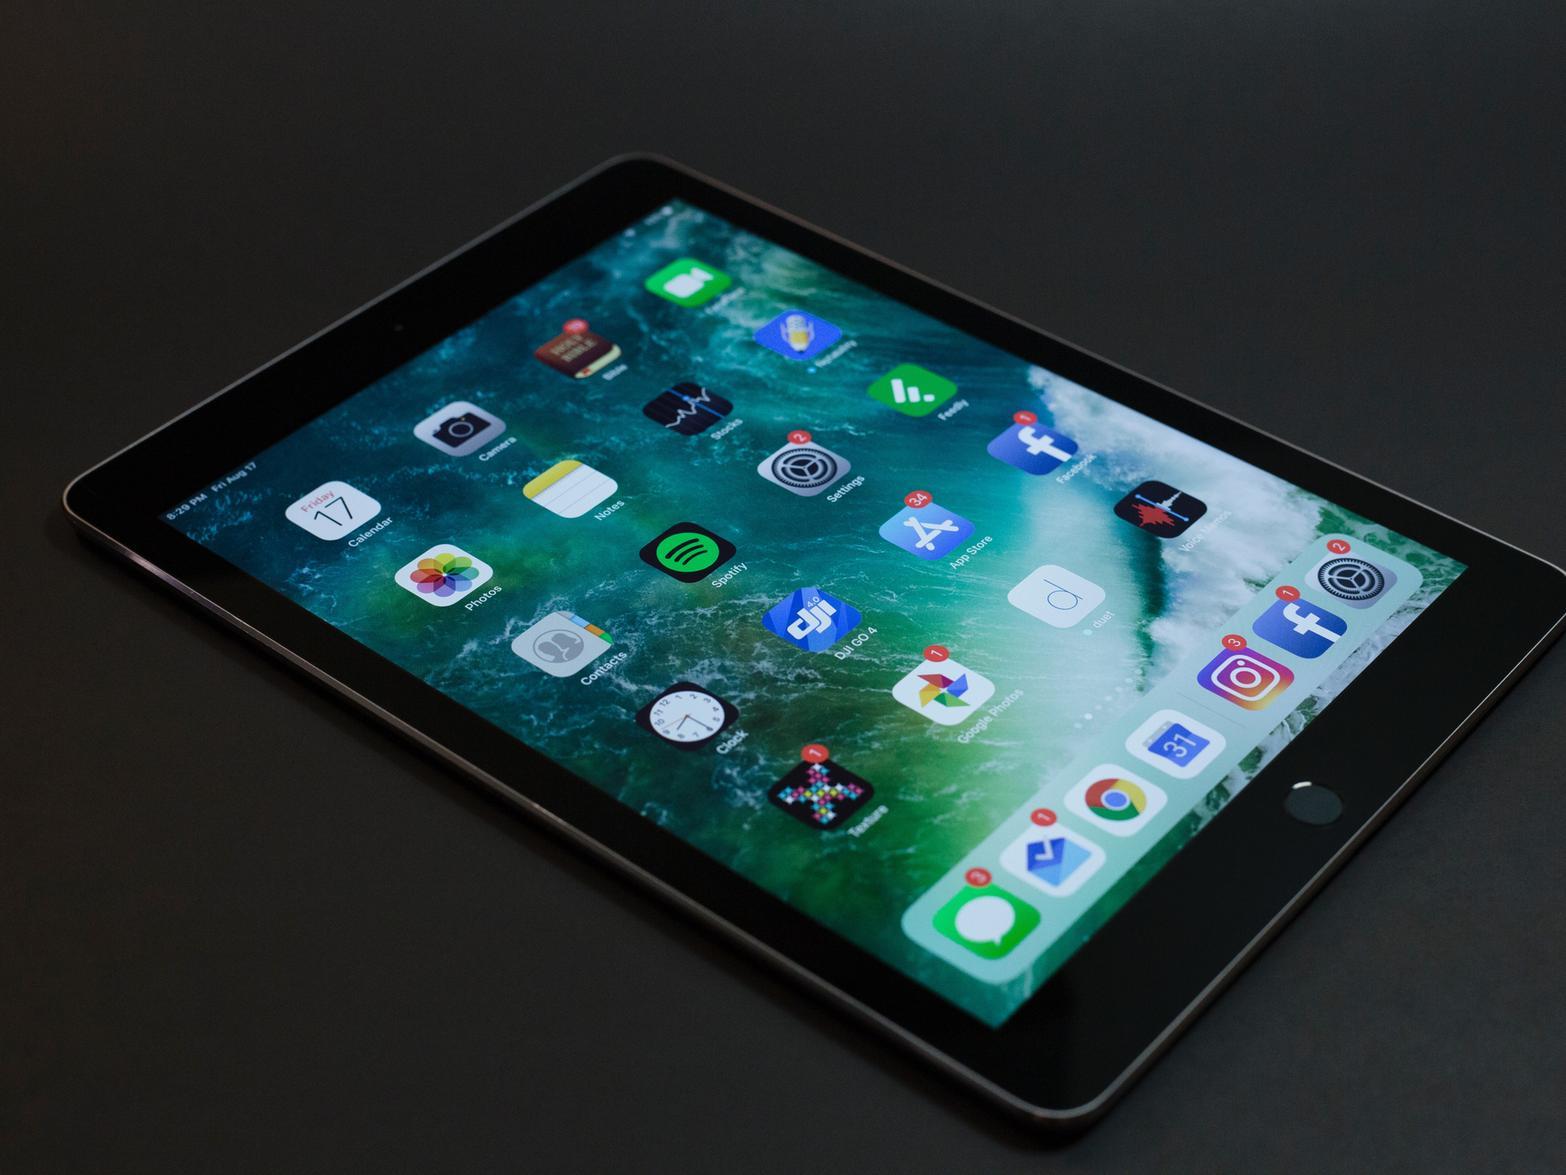 The iPad was introduced as a thinner, less bulky and touchscreen-enabled alternative to the laptop. Though tablet use has evolved since, and many rivals have emerged, this is the device which started it all.